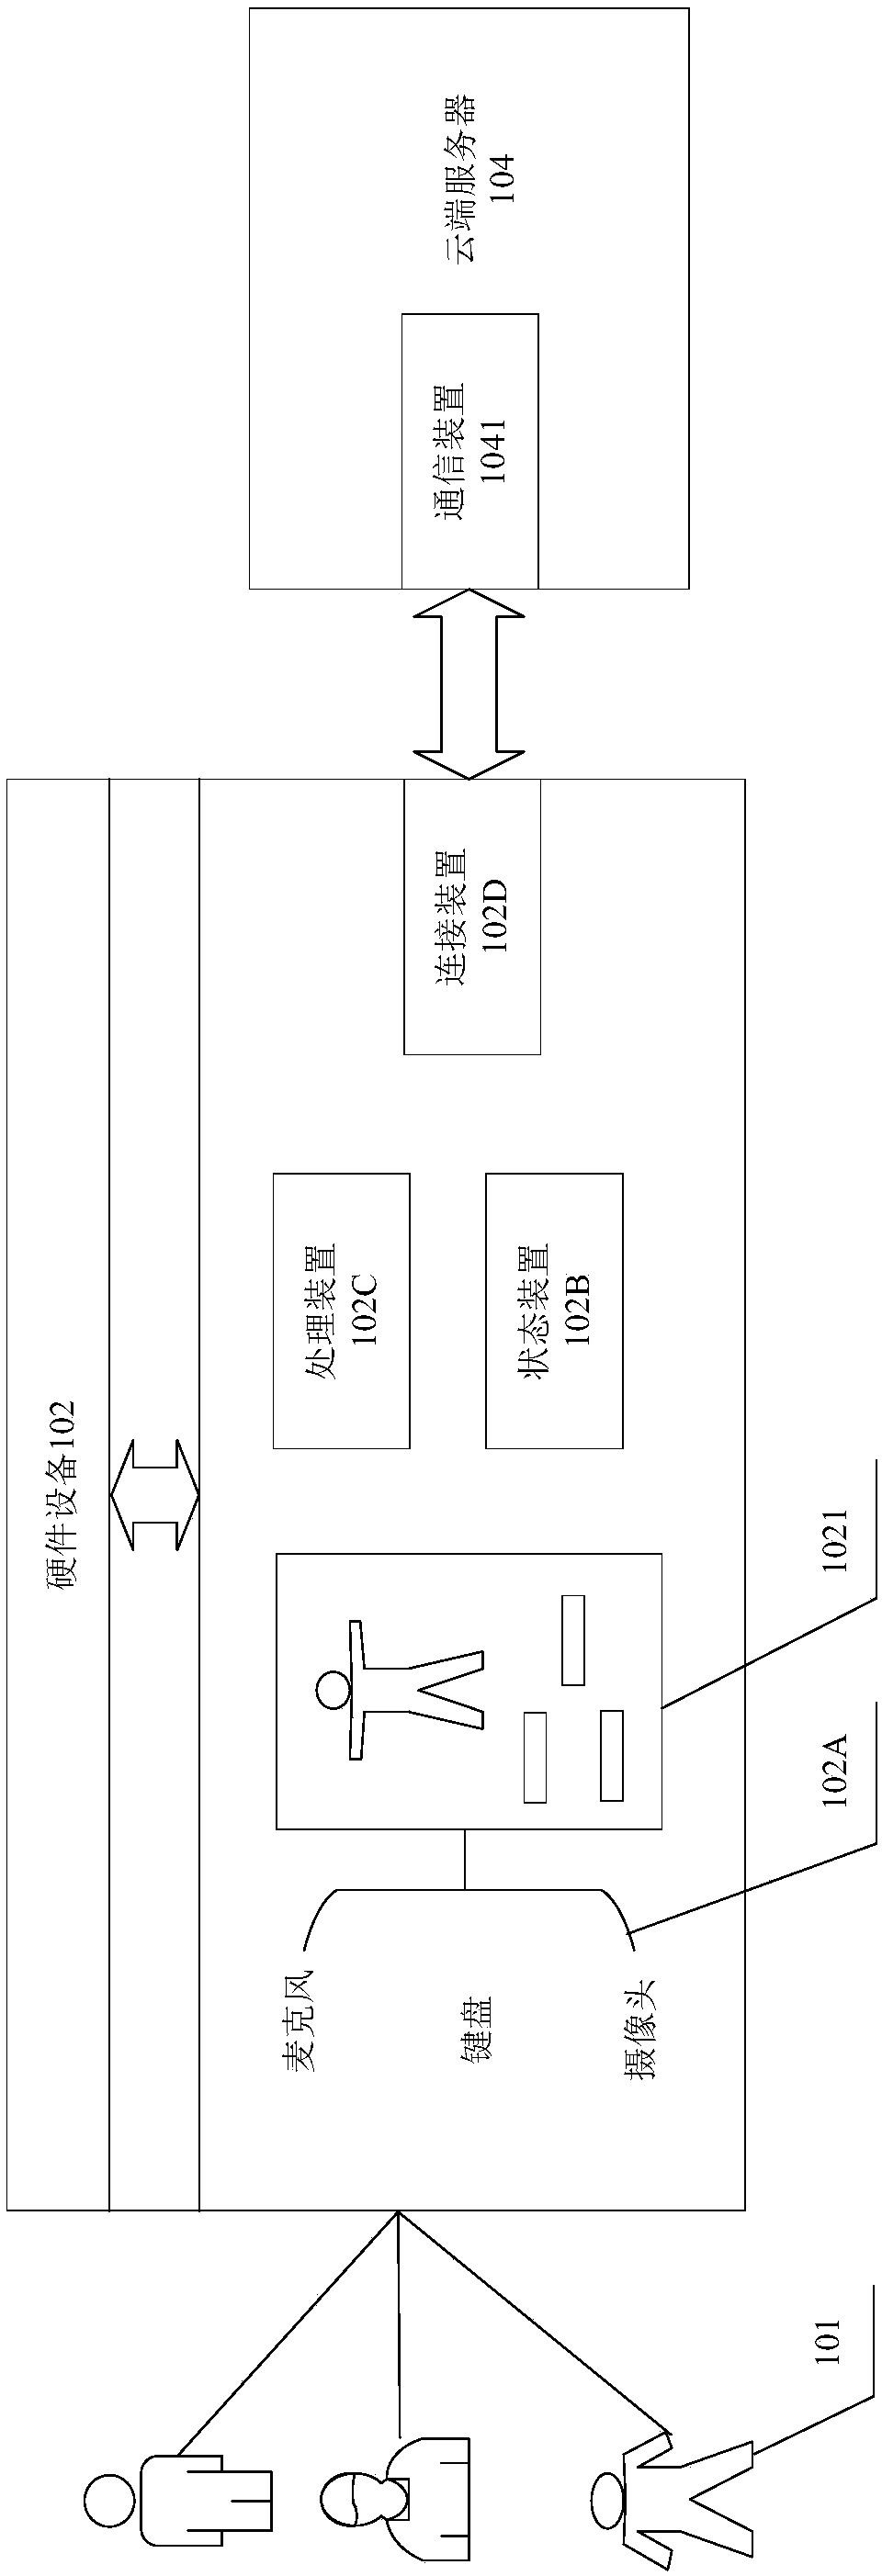 Virtual human state management method and system